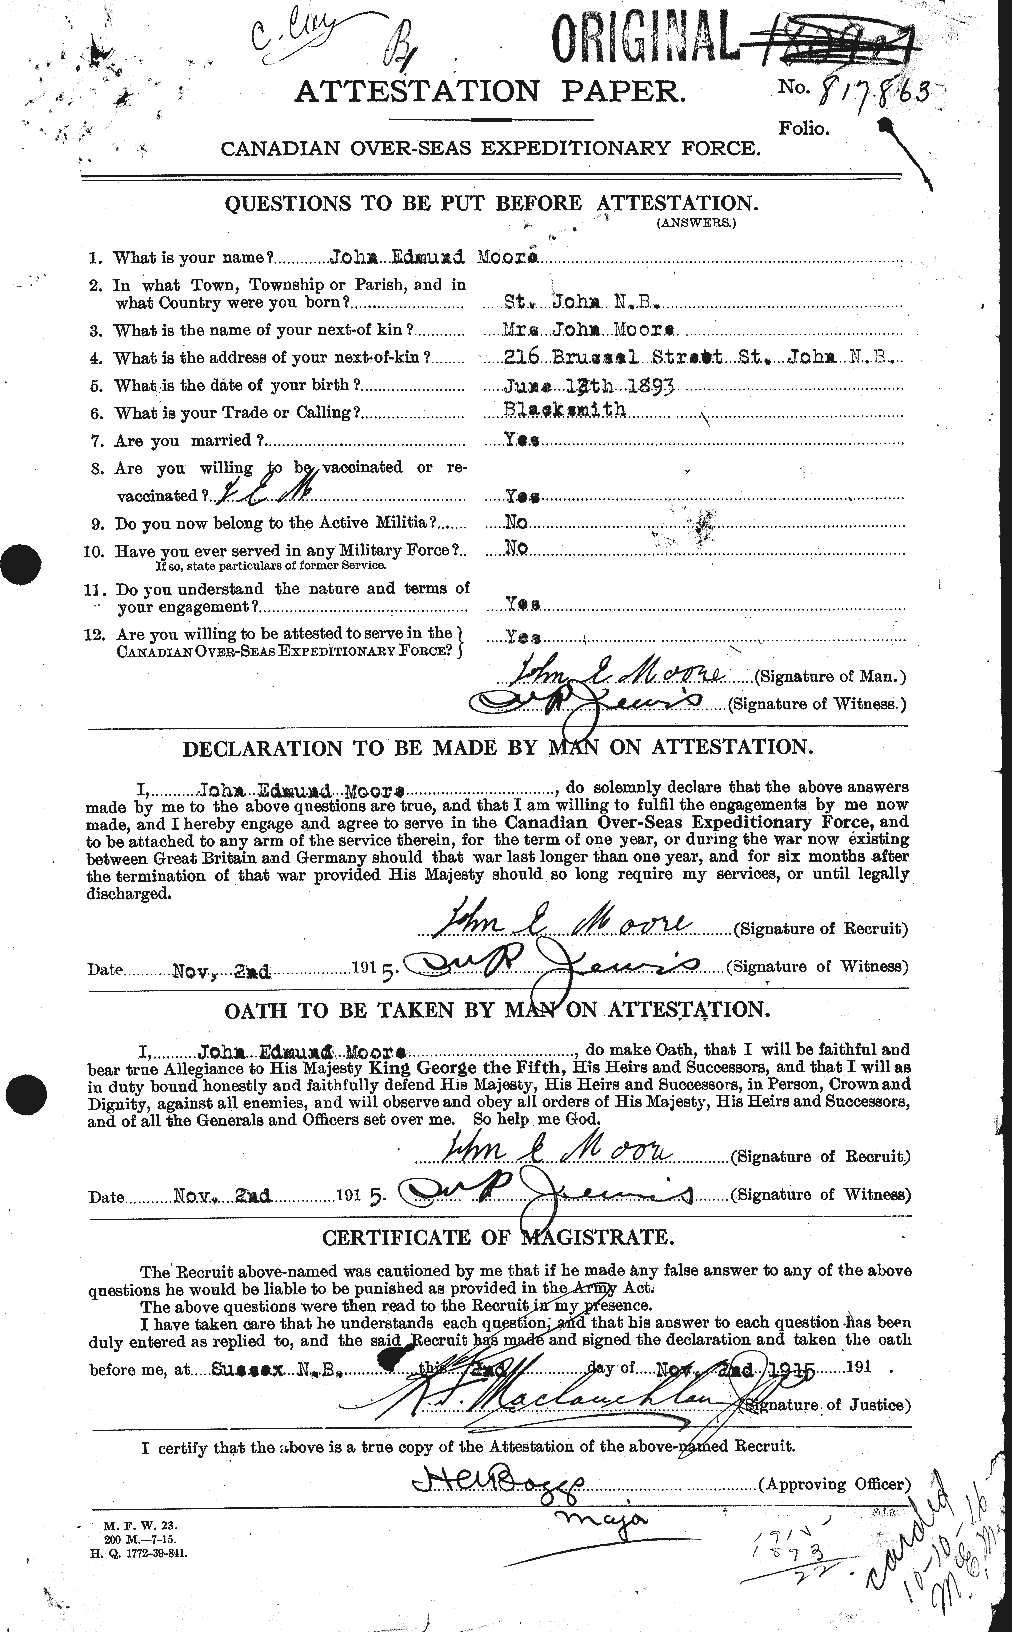 Personnel Records of the First World War - CEF 503276a